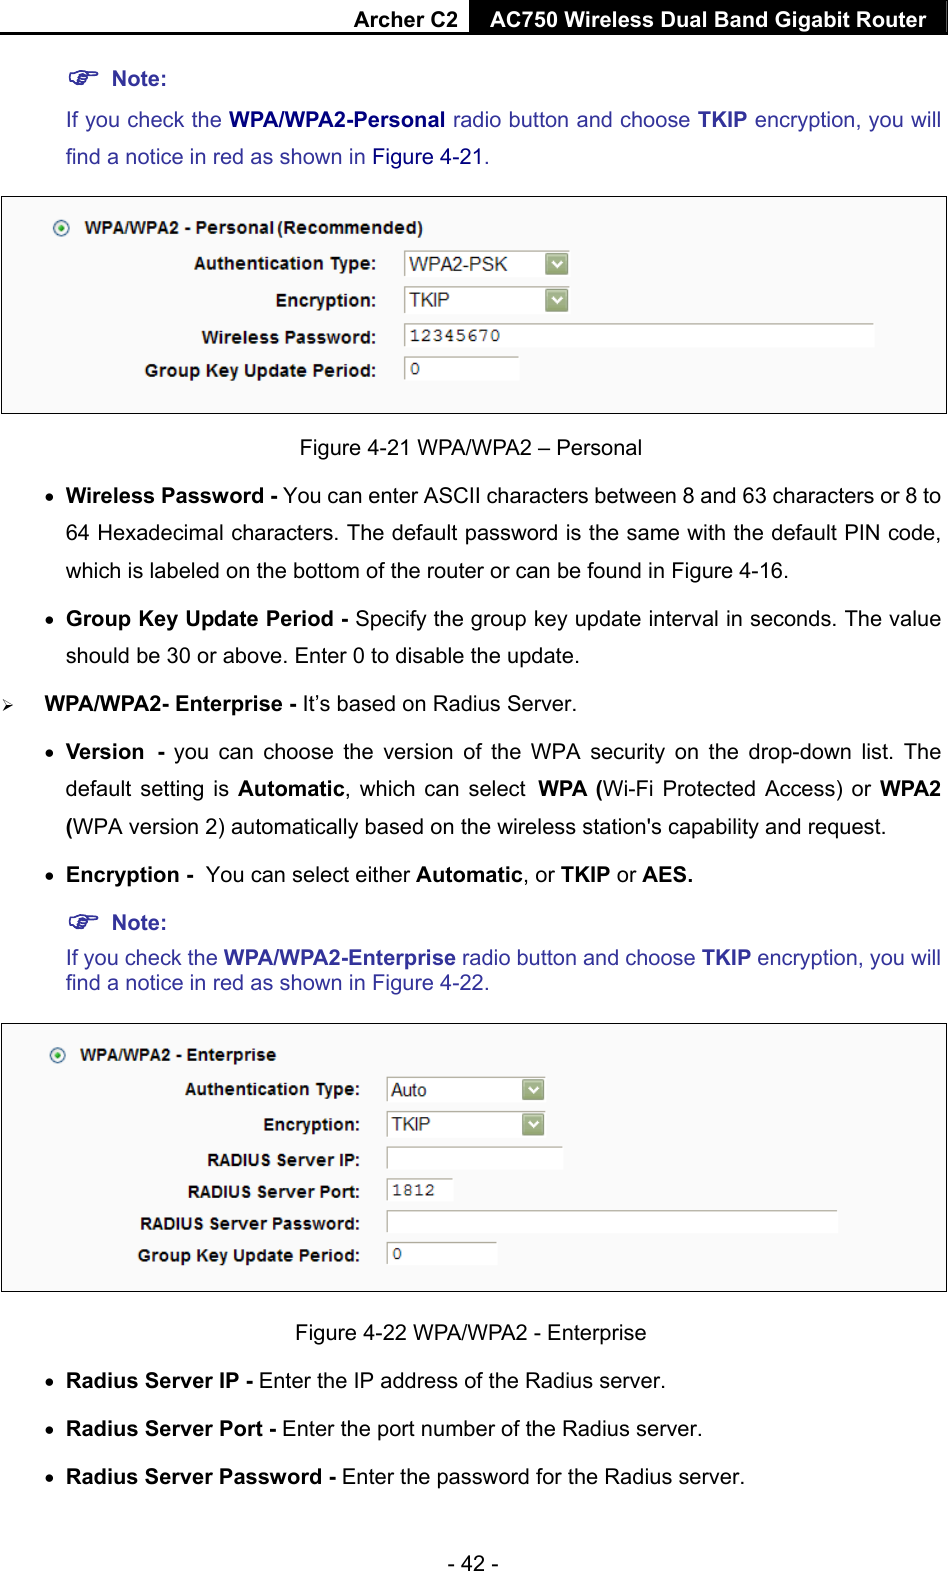 Archer C2 AC750 Wireless Dual Band Gigabit Router  - 42 -  Note:  If you check the WPA/WPA2-Personal radio button and choose TKIP encryption, you will find a notice in red as shown in Figure 4-21.  Figure 4-21 WPA/WPA2 – Personal  Wireless Password - You can enter ASCII characters between 8 and 63 characters or 8 to 64 Hexadecimal characters. The default password is the same with the default PIN code, which is labeled on the bottom of the router or can be found in Figure 4-16.  Group Key Update Period - Specify the group key update interval in seconds. The value should be 30 or above. Enter 0 to disable the update.  WPA/WPA2- Enterprise - It’s based on Radius Server.  Version - you can choose the version of the WPA security on the drop-down list. The default setting is Automatic, which can select WPA (Wi-Fi Protected Access) or WPA2 (WPA version 2) automatically based on the wireless station&apos;s capability and request.  Encryption - You can select either Automatic, or TKIP or AES.  Note: If you check the WPA/WPA2-Enterprise radio button and choose TKIP encryption, you will find a notice in red as shown in Figure 4-22.  Figure 4-22 WPA/WPA2 - Enterprise  Radius Server IP - Enter the IP address of the Radius server.  Radius Server Port - Enter the port number of the Radius server.  Radius Server Password - Enter the password for the Radius server. 